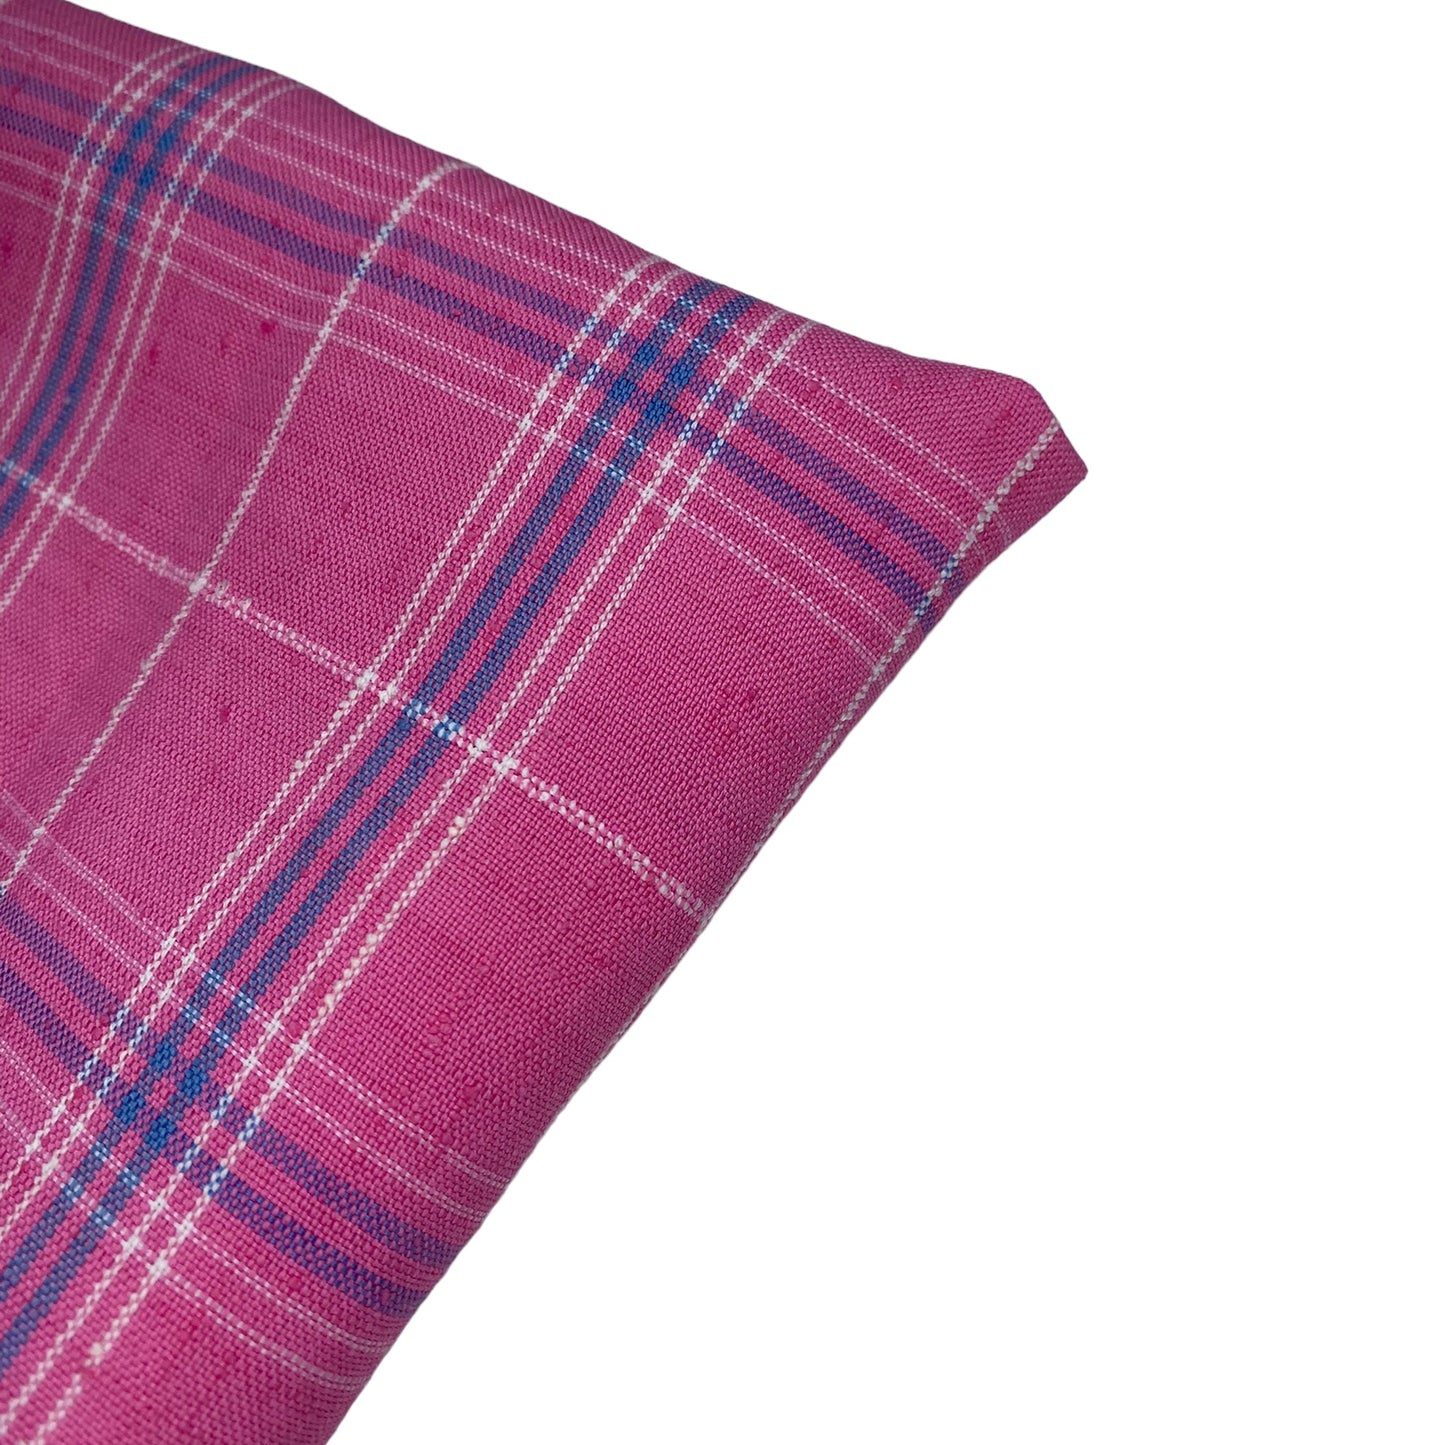 Yarn Dyed Plaid Linen - Remnant - Pink/White/Blue